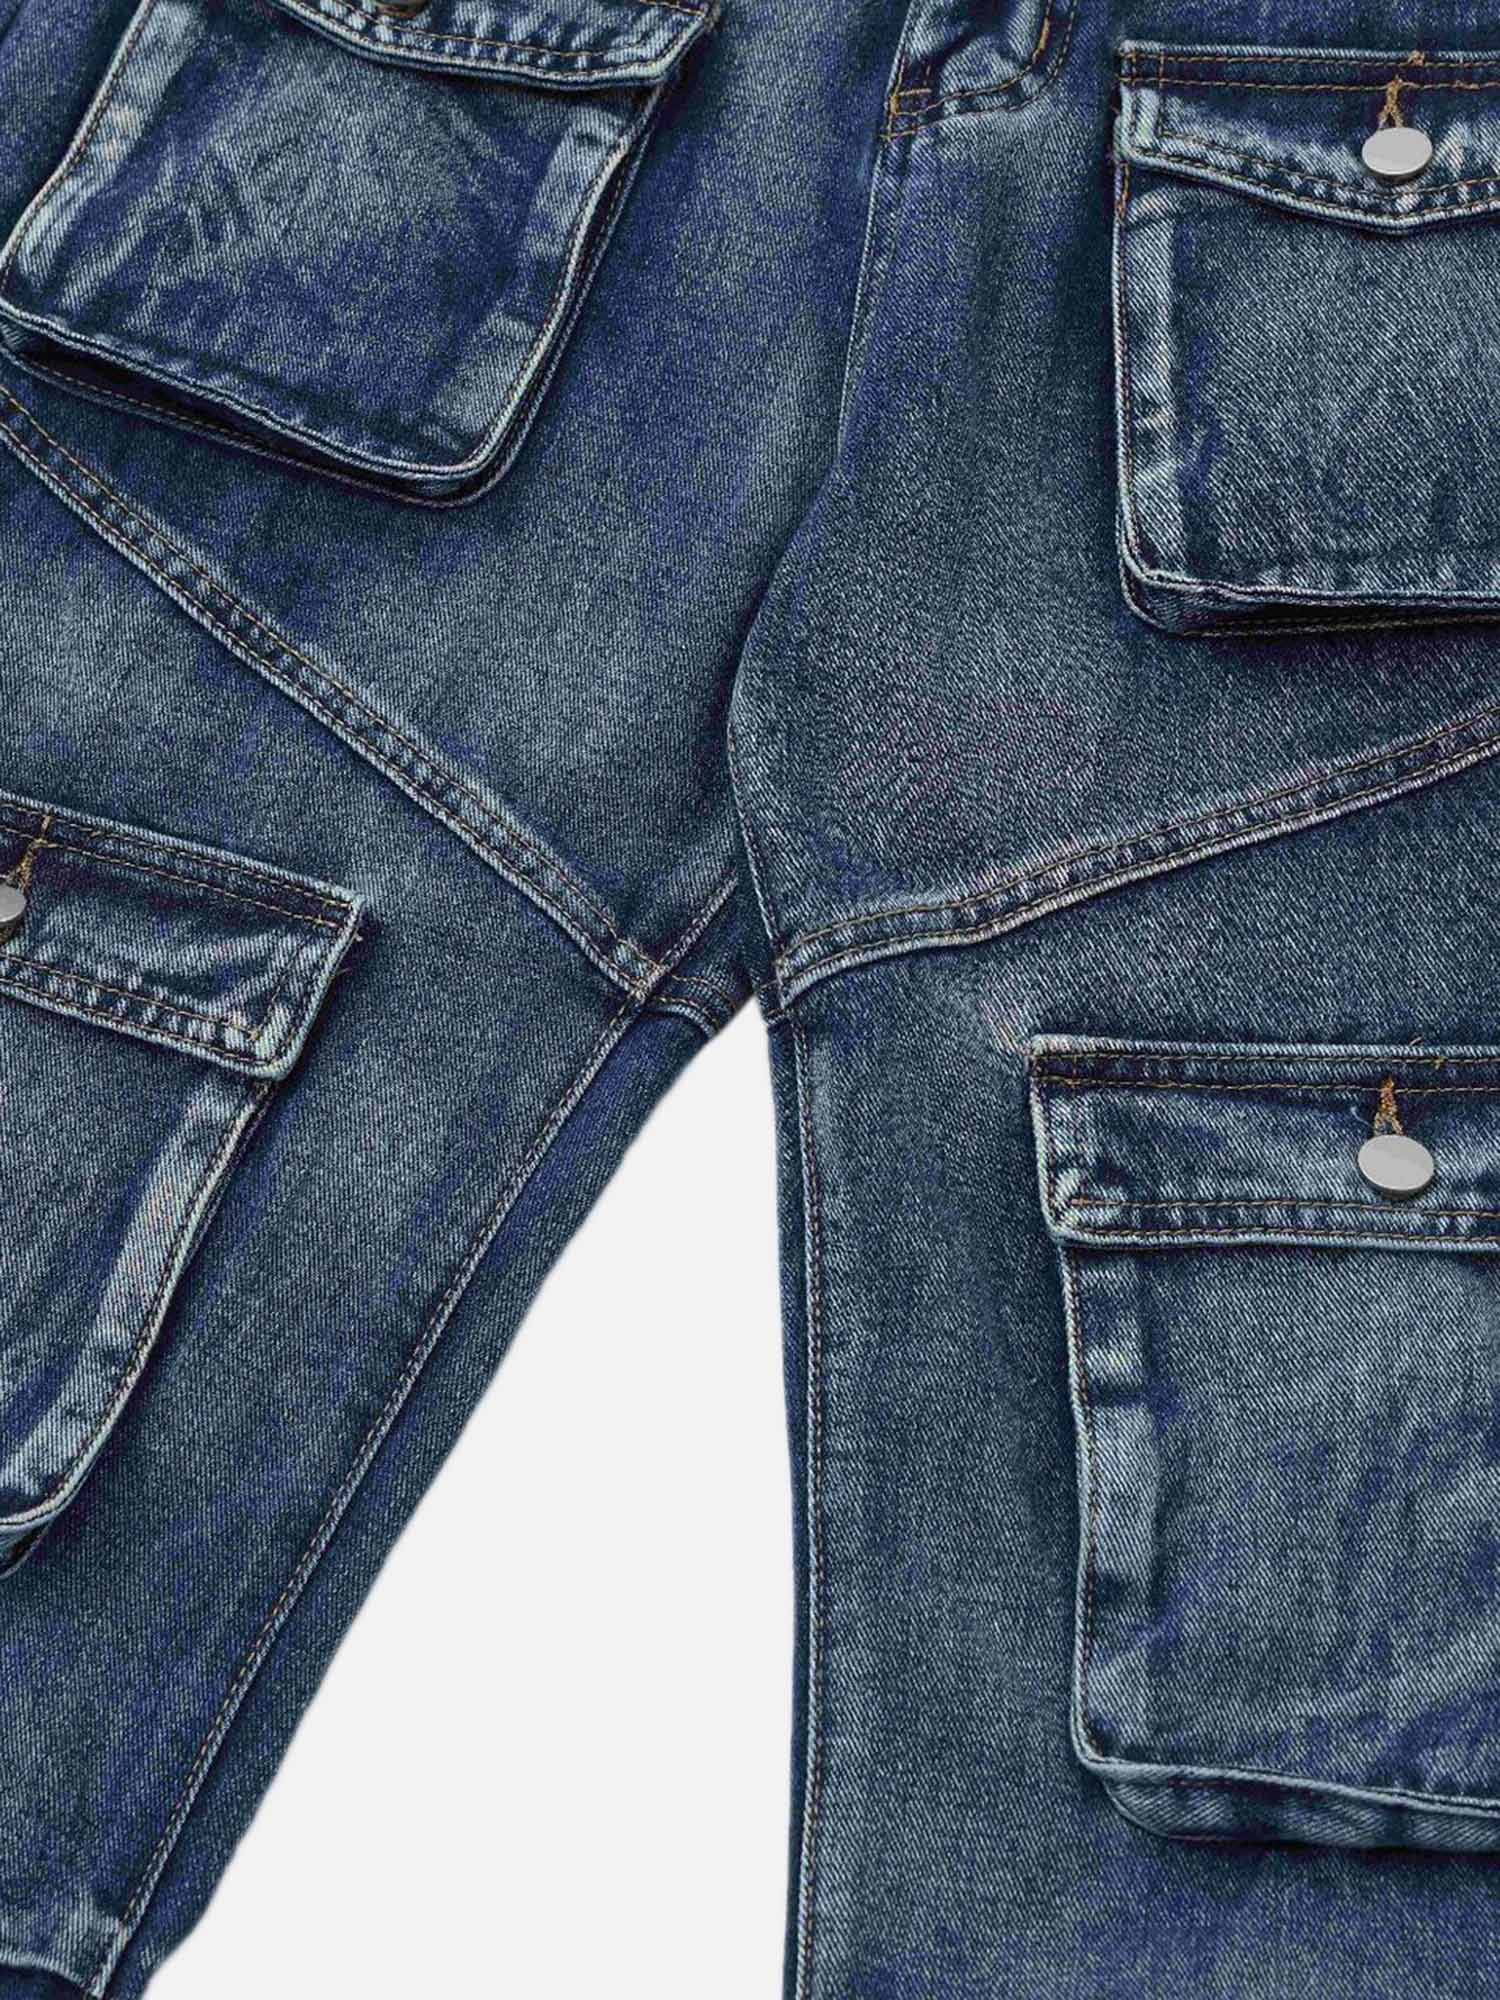 American Street Fashion Heavy Industry Washed Work Jeans